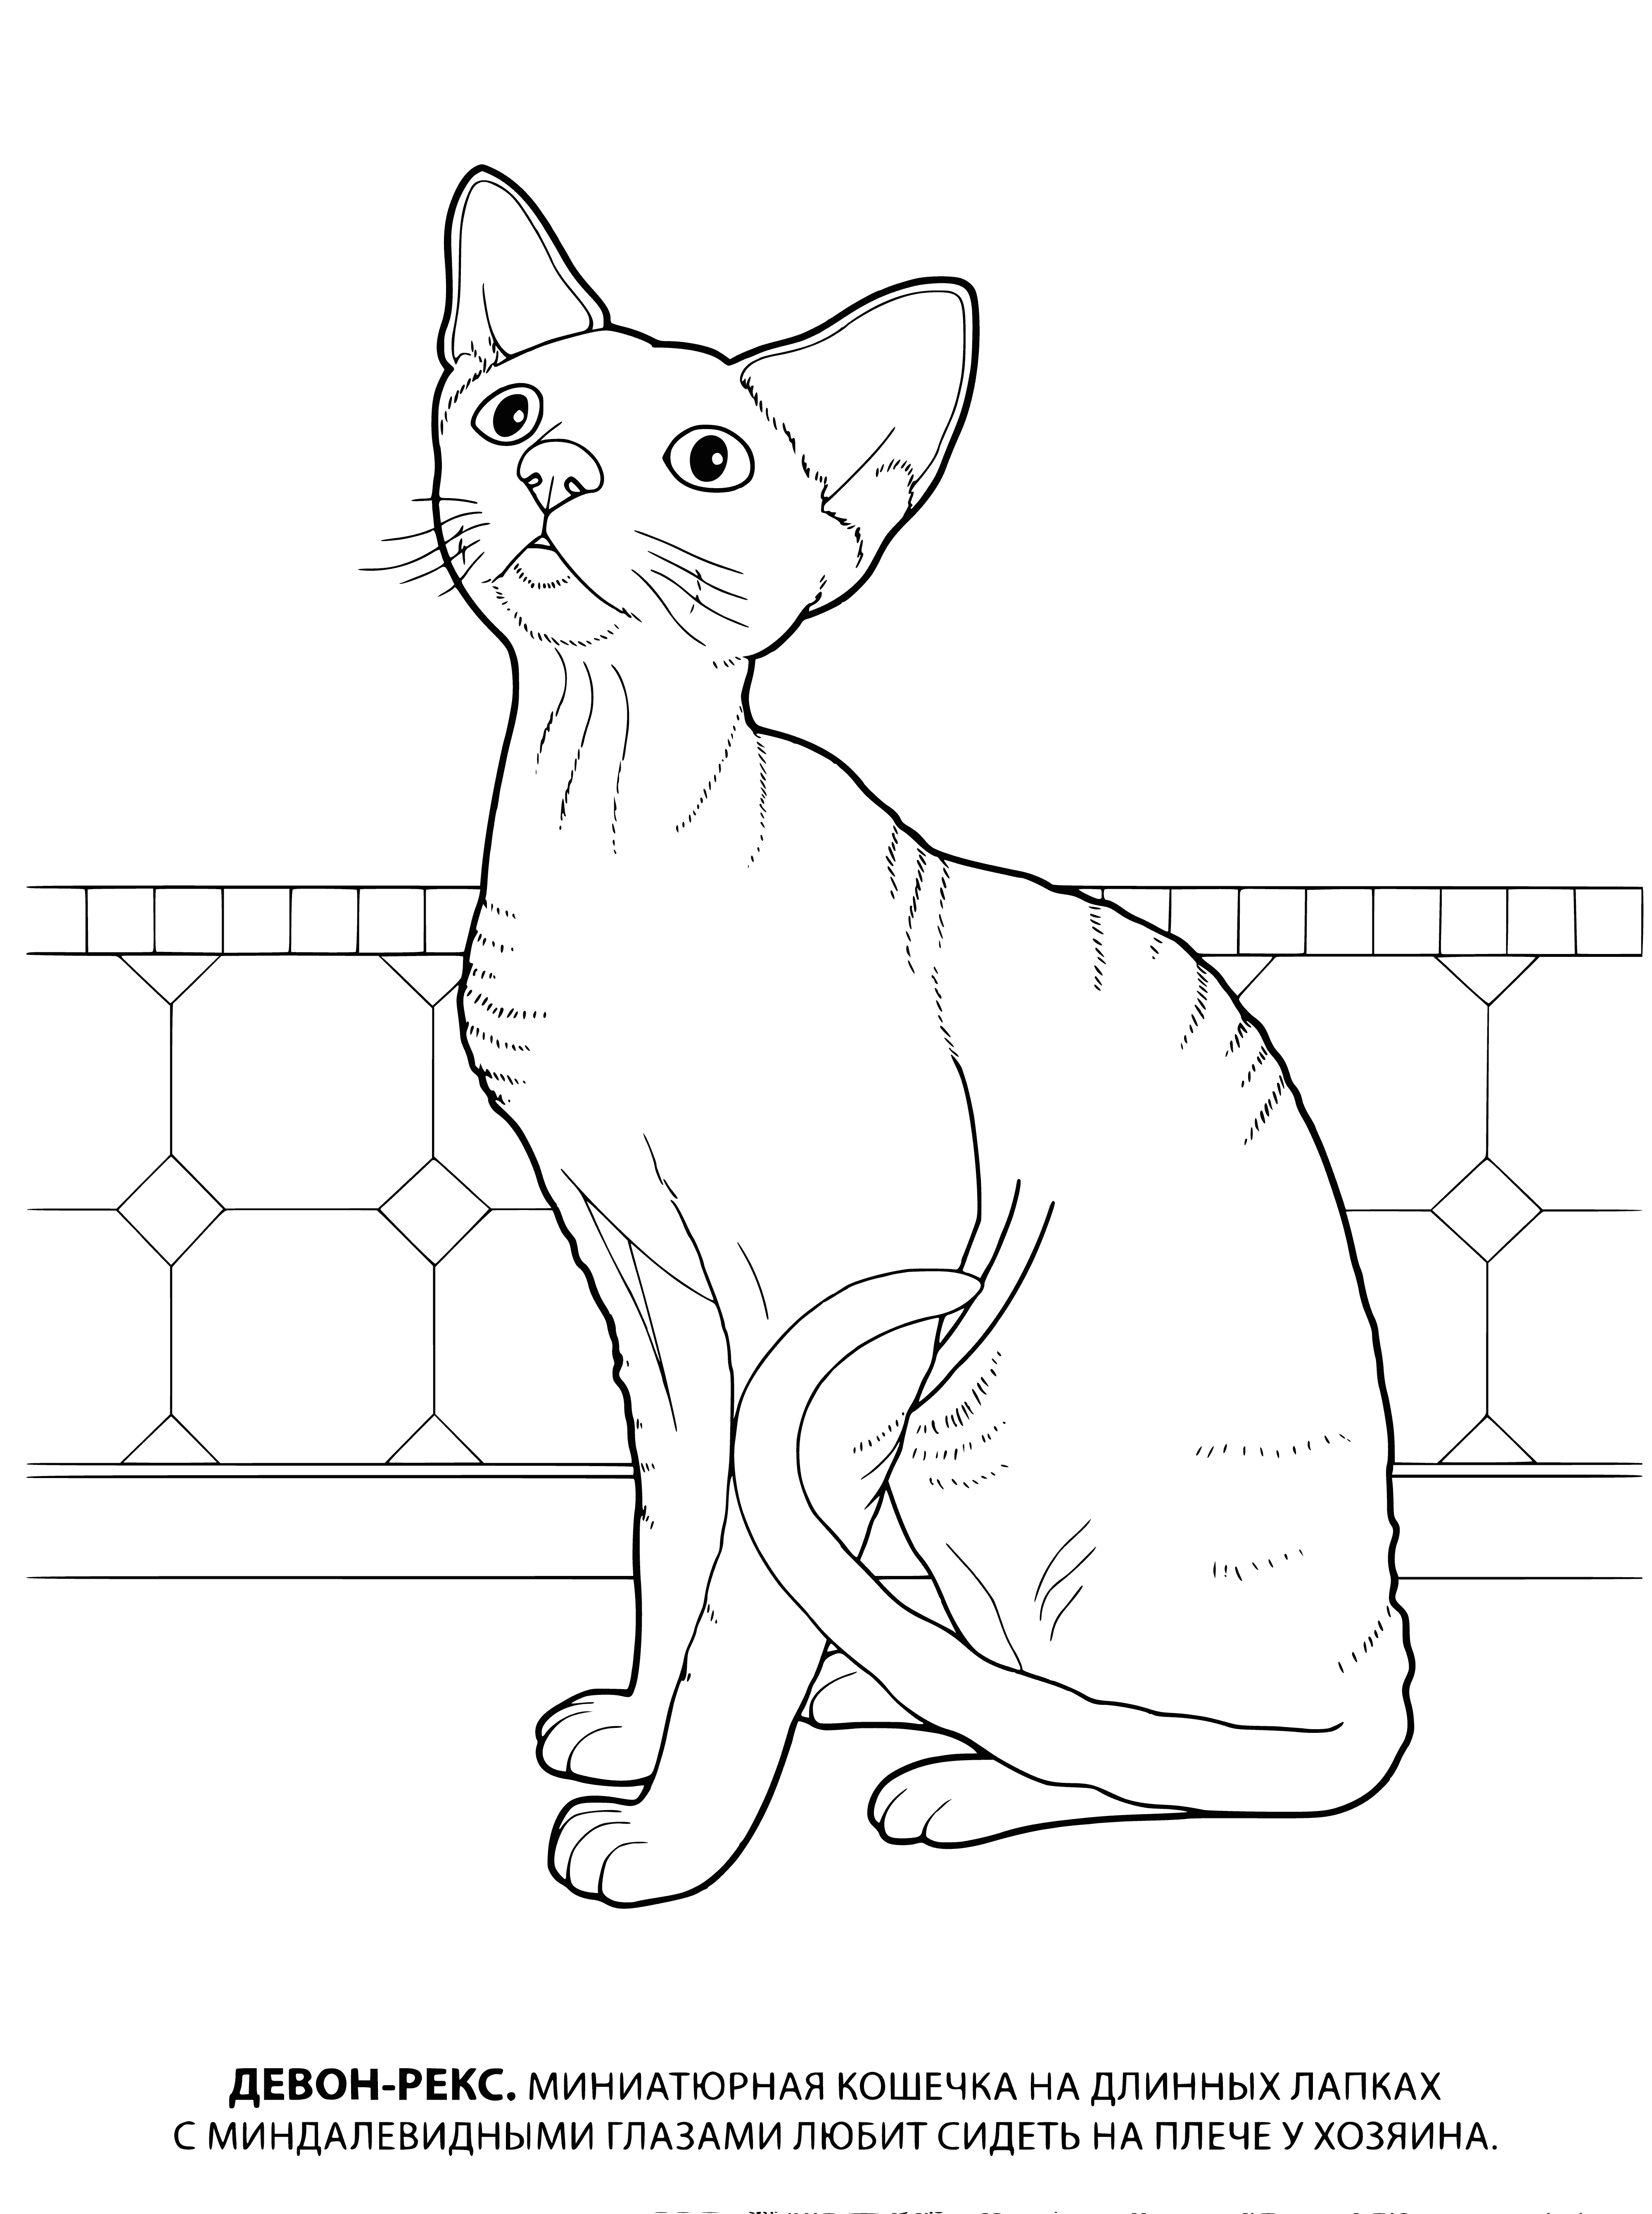 coloring page: Affectionate, intelligent, short-legged cats w/wavy coats & big ears. Playful, independent & can learn tricks. Great companions for any age.